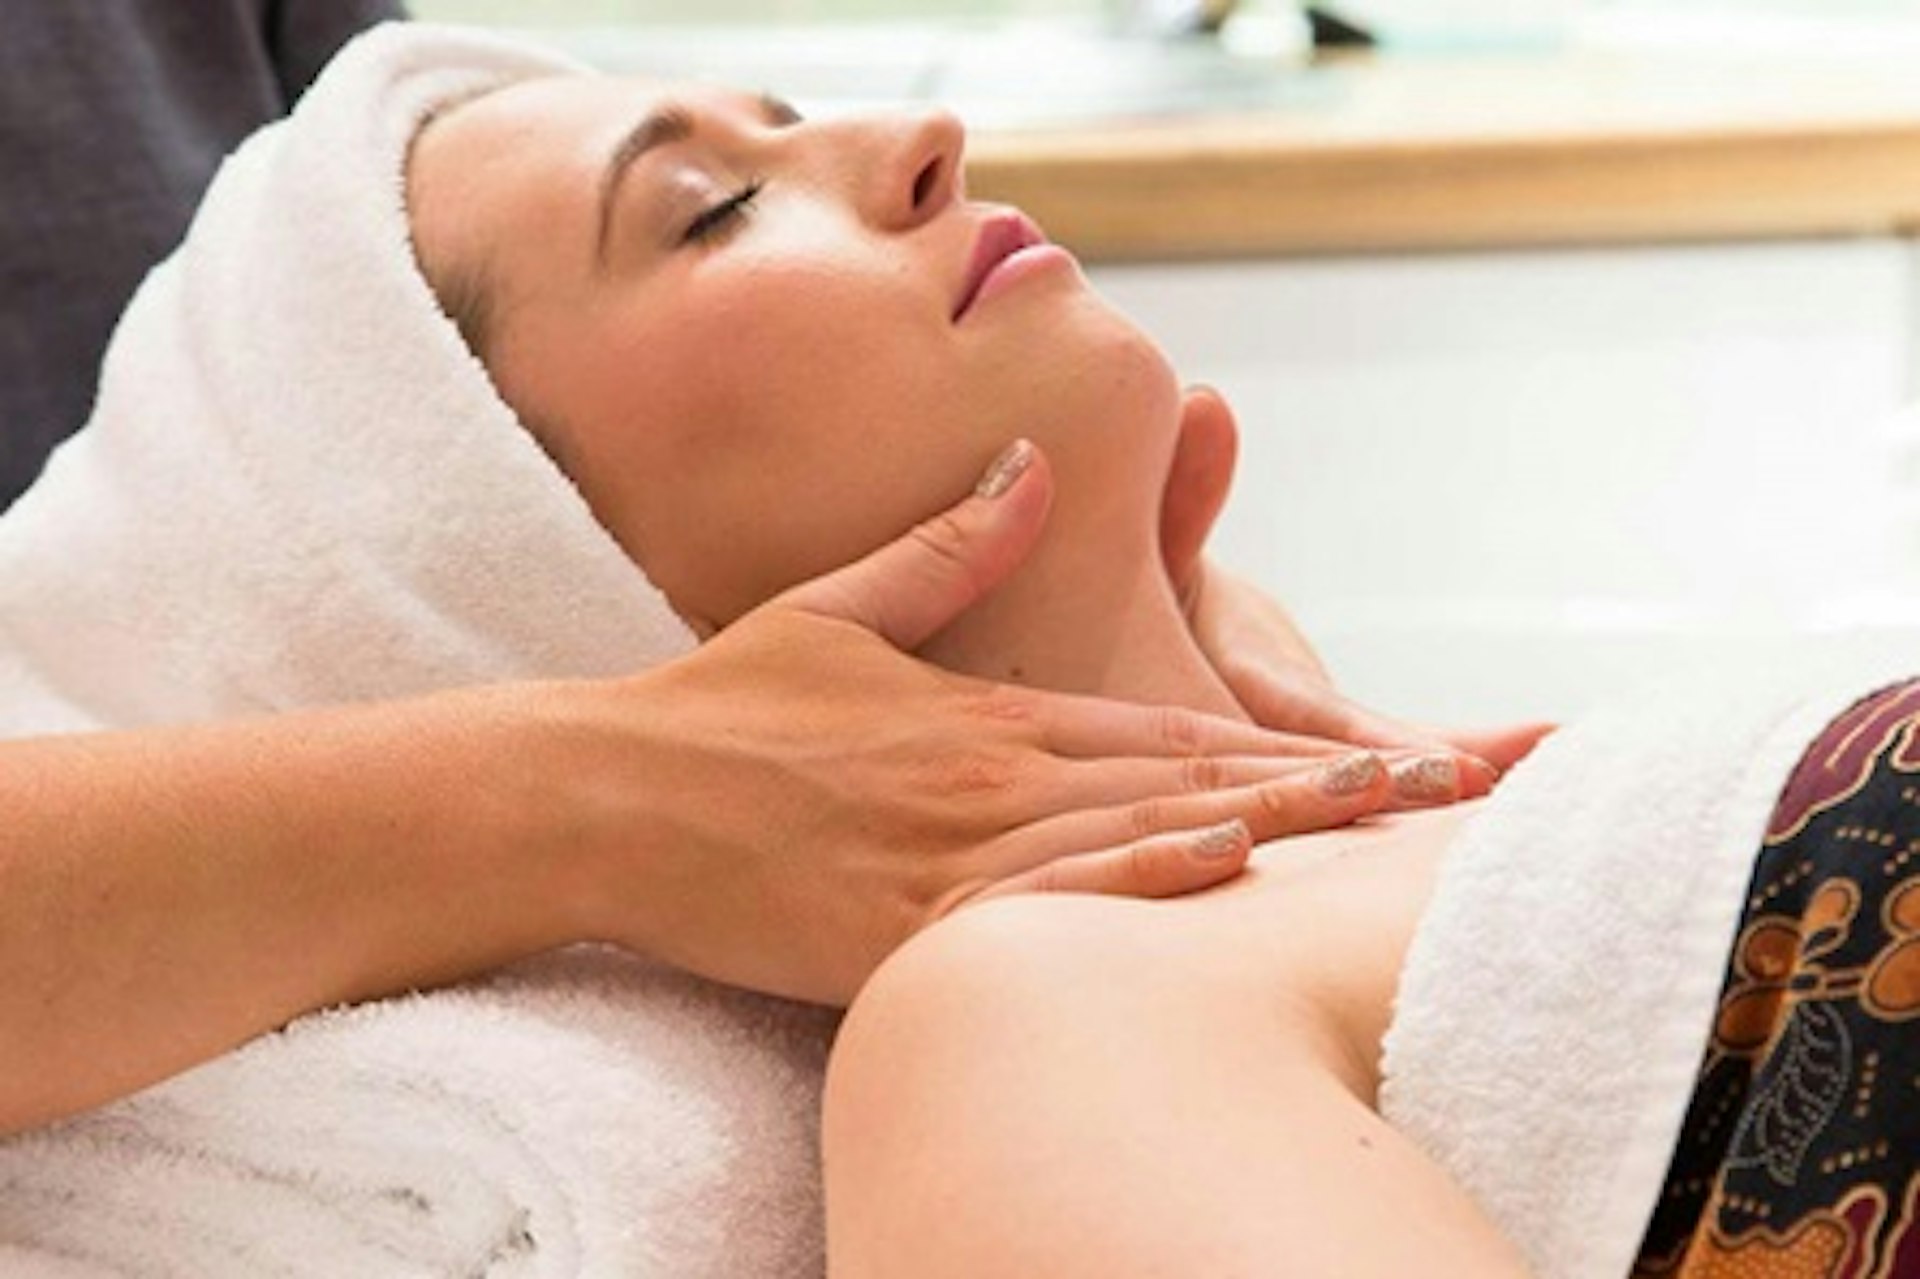 PURE Spa & Beauty Pamper Package including a 60 minute Massage or Facial